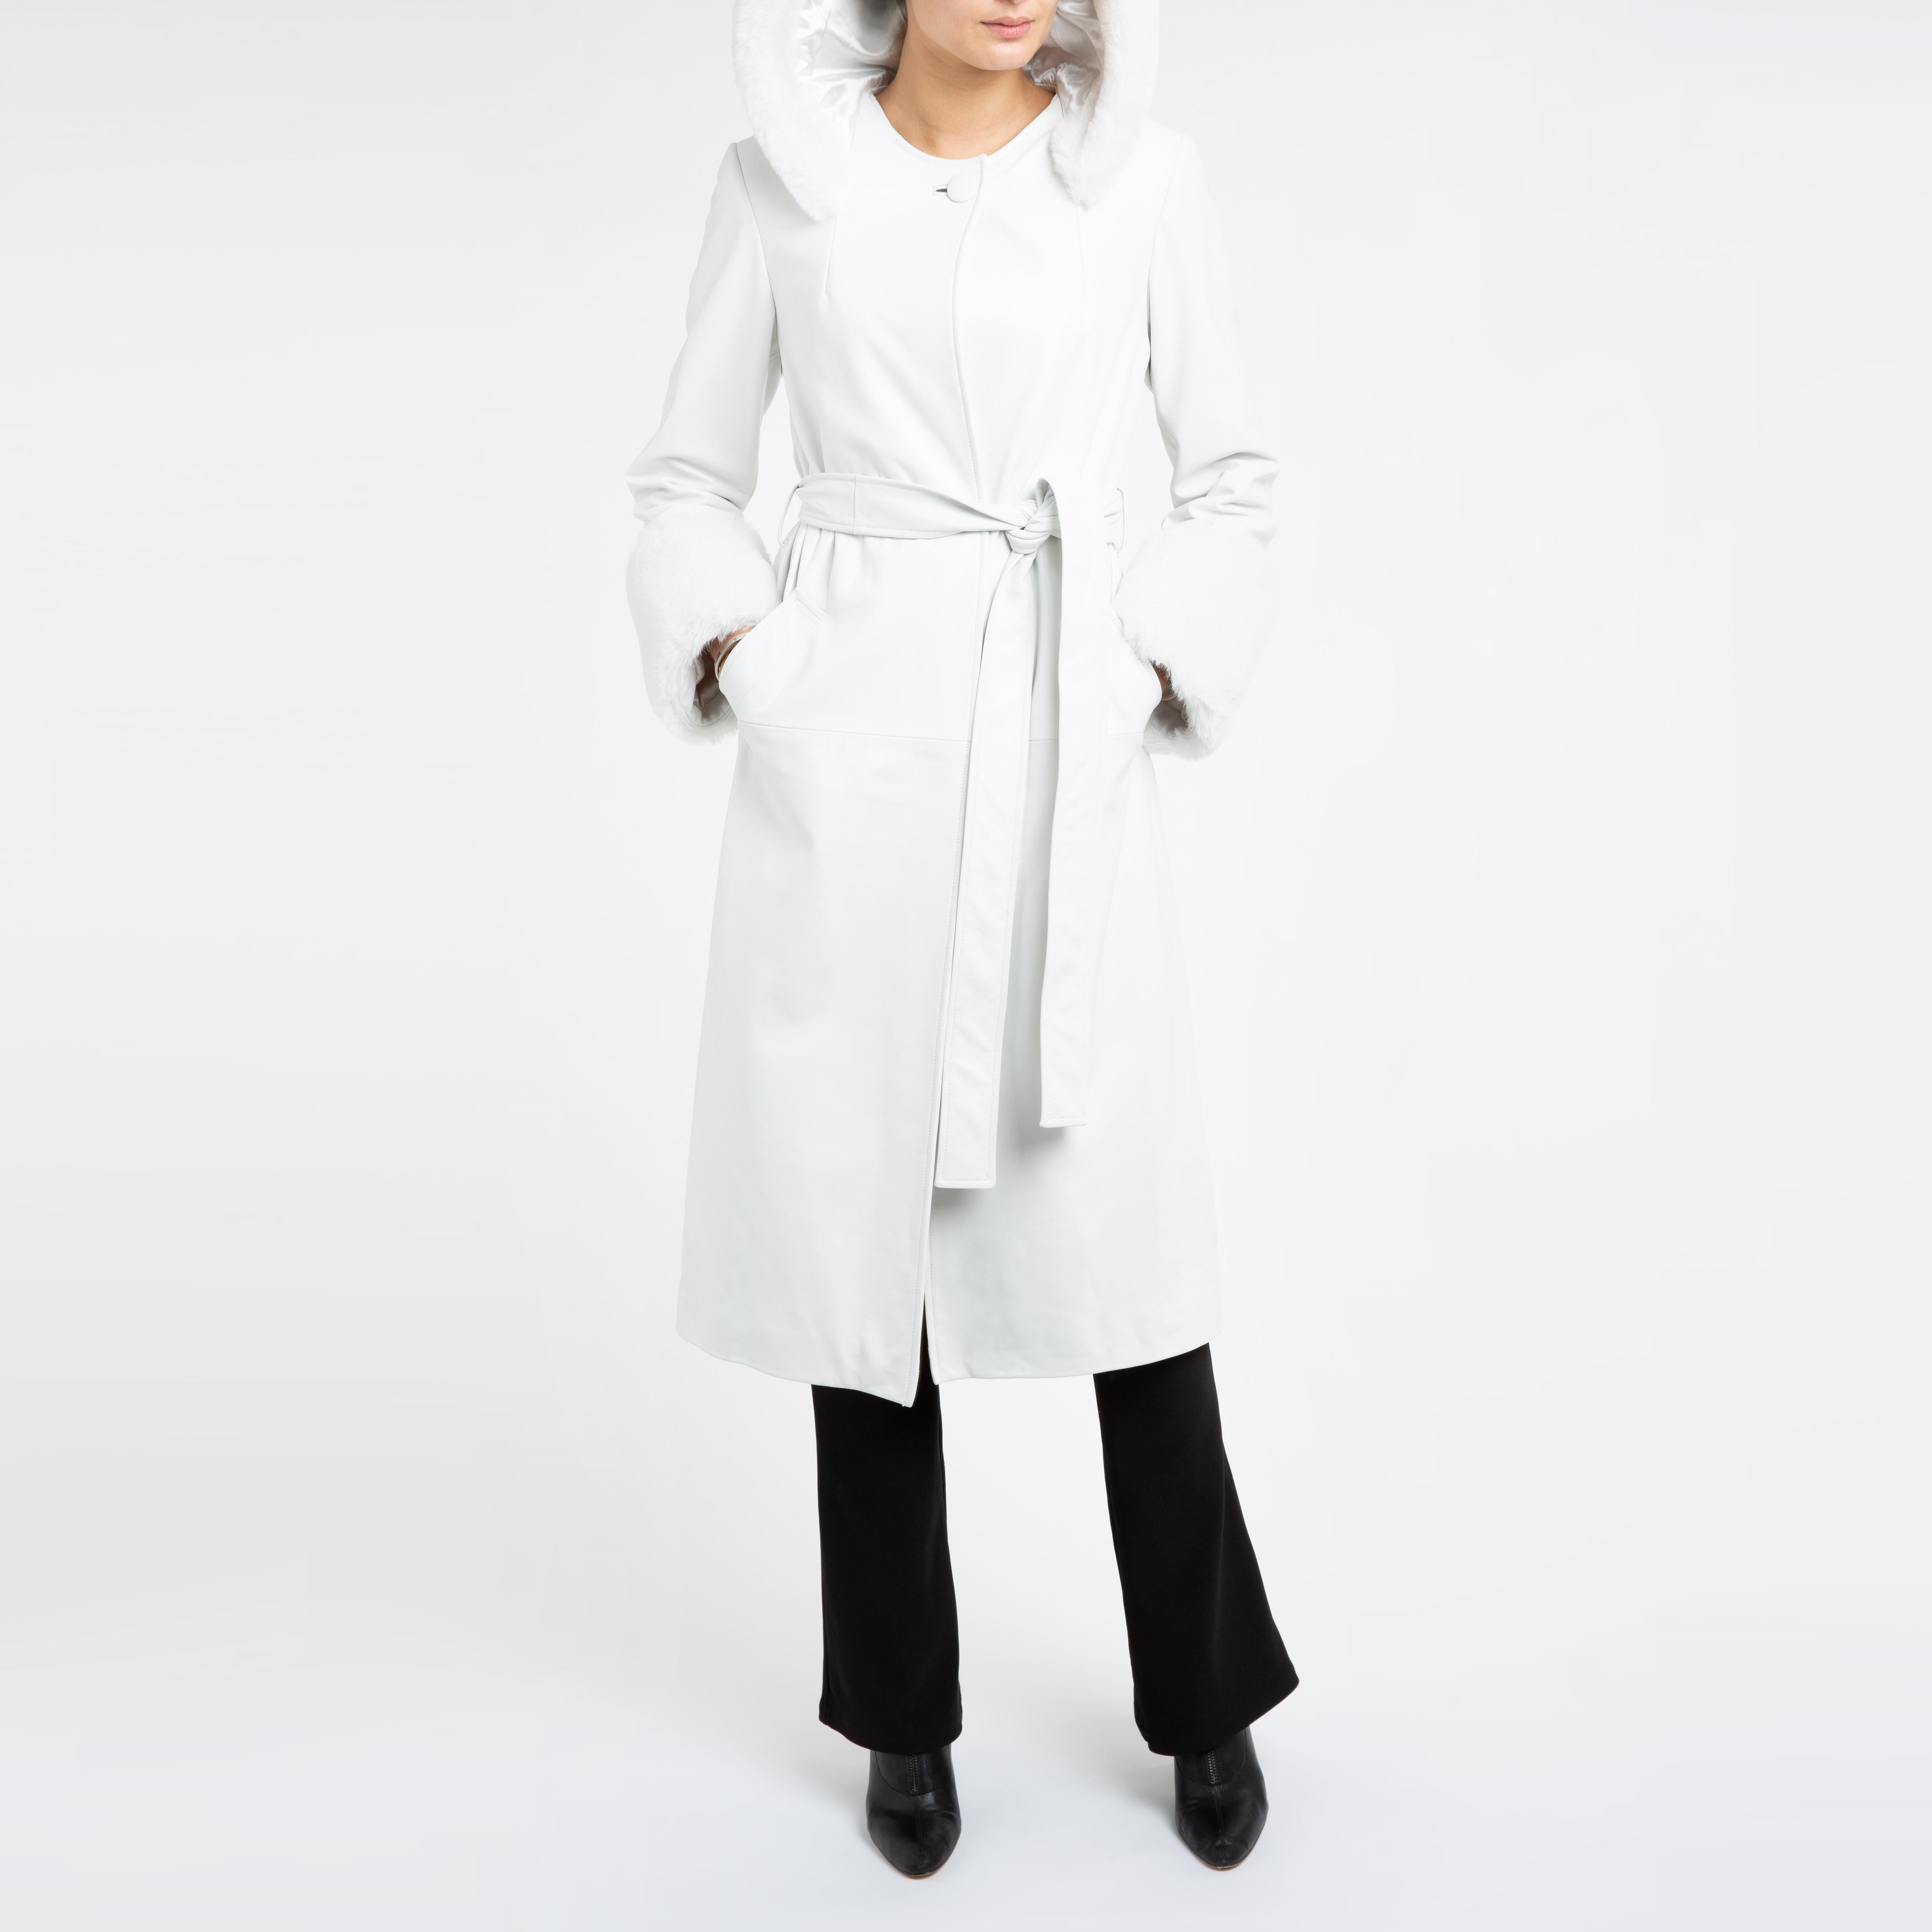 Verheyen Aurora Hooded Leather Trench Coat in White with Faux Fur - Size uk 8 For Sale 4